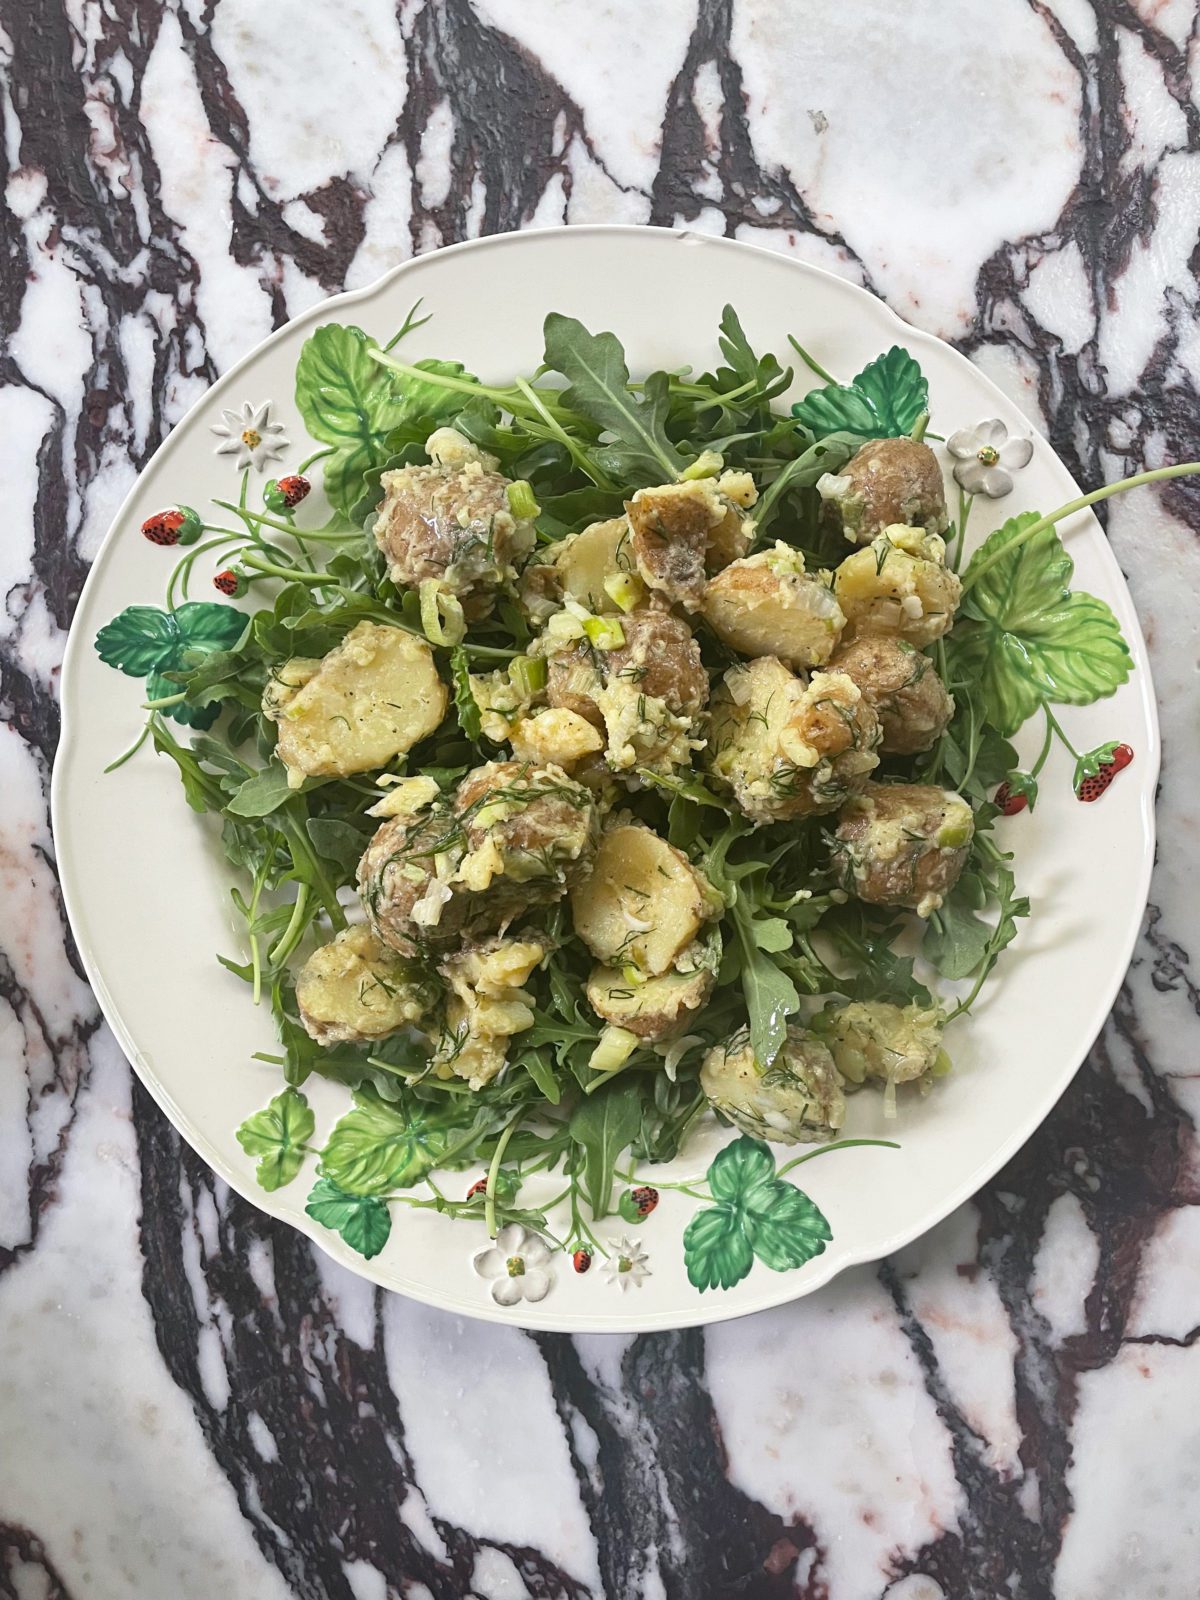 This Healthy Potato Salad Recipe I Love Makes Mealtime Easy | Wit & Delight